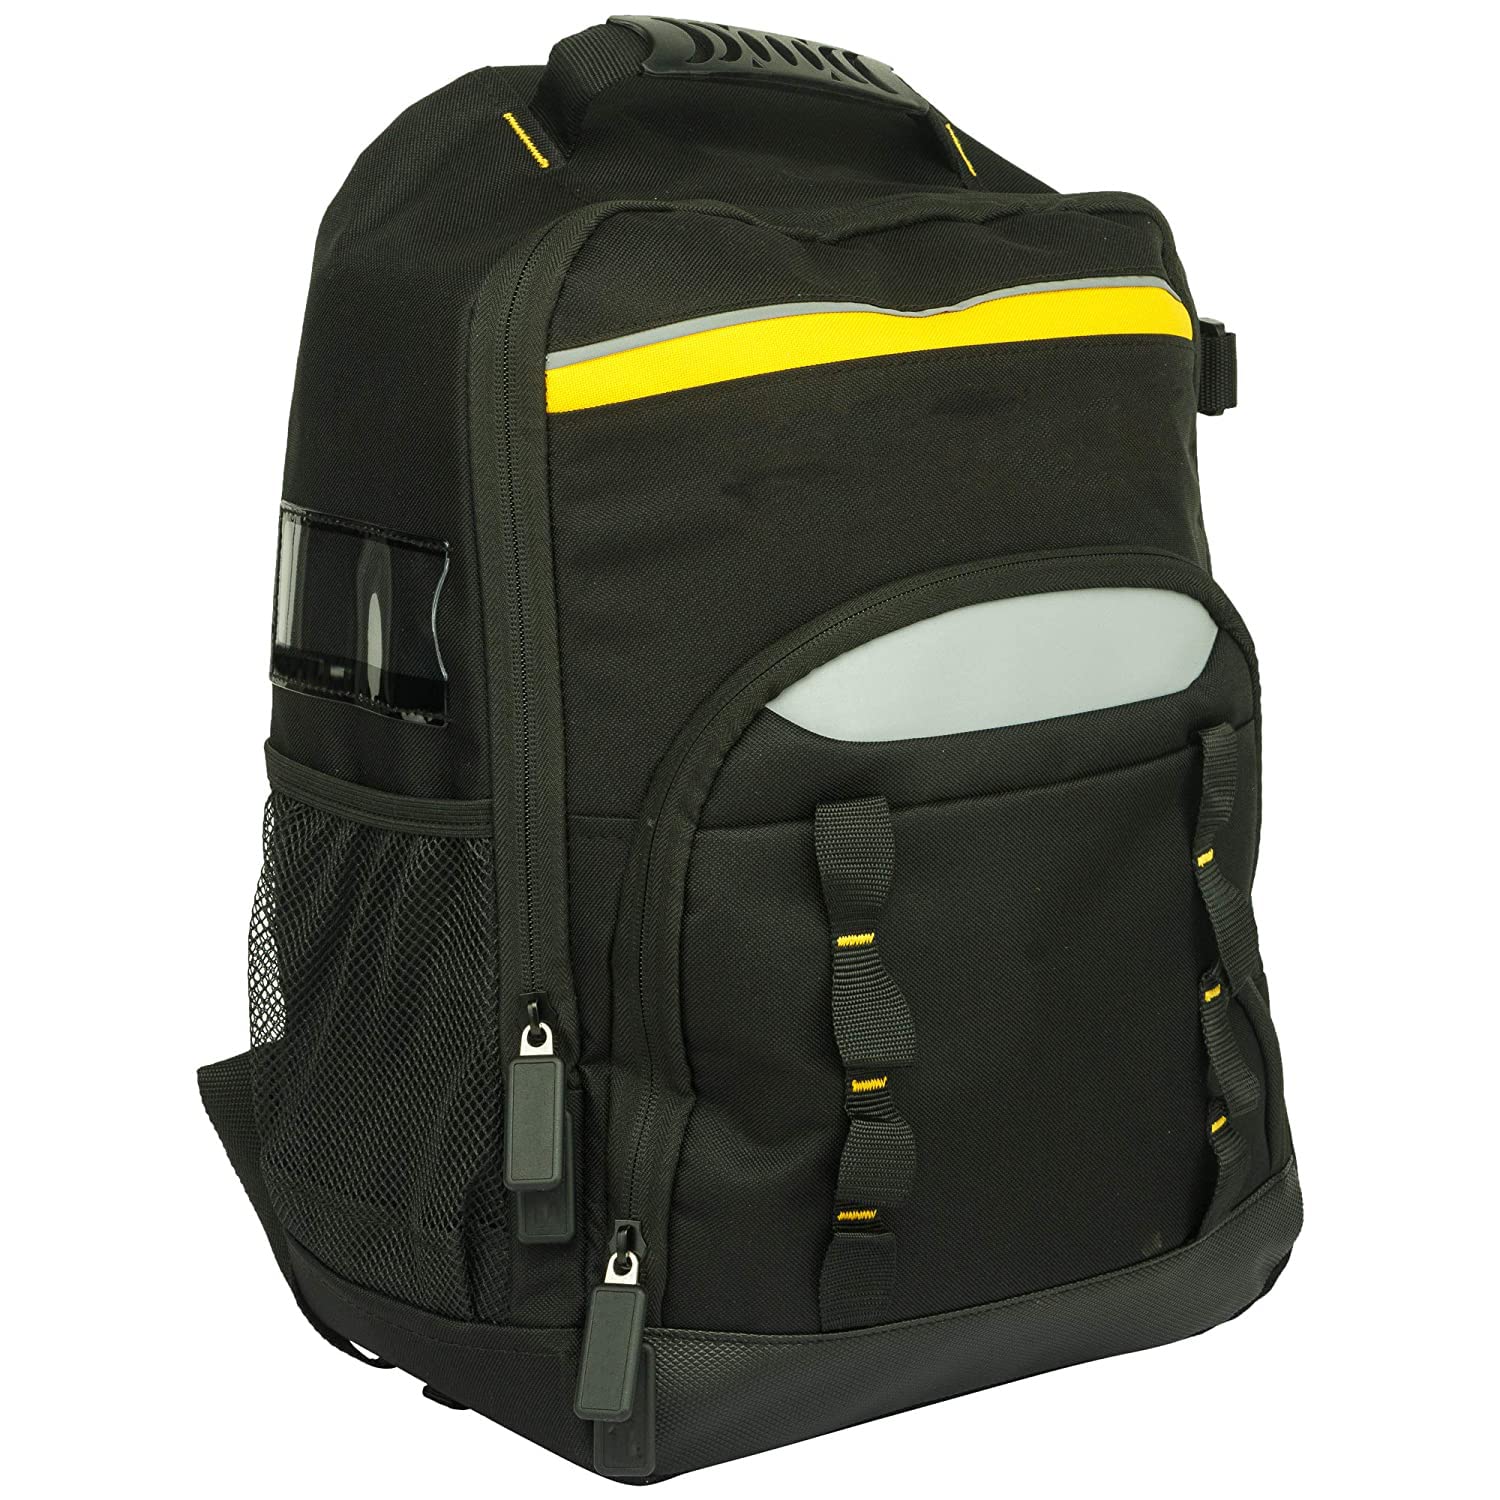 https://www.envmart.com/ENVMartImages/ProductImage/pahal-heavy-duty-fabric-tool-bag-back-pack-yellow-black-for-electrician-technician-service-engineer-61160-1.jpg